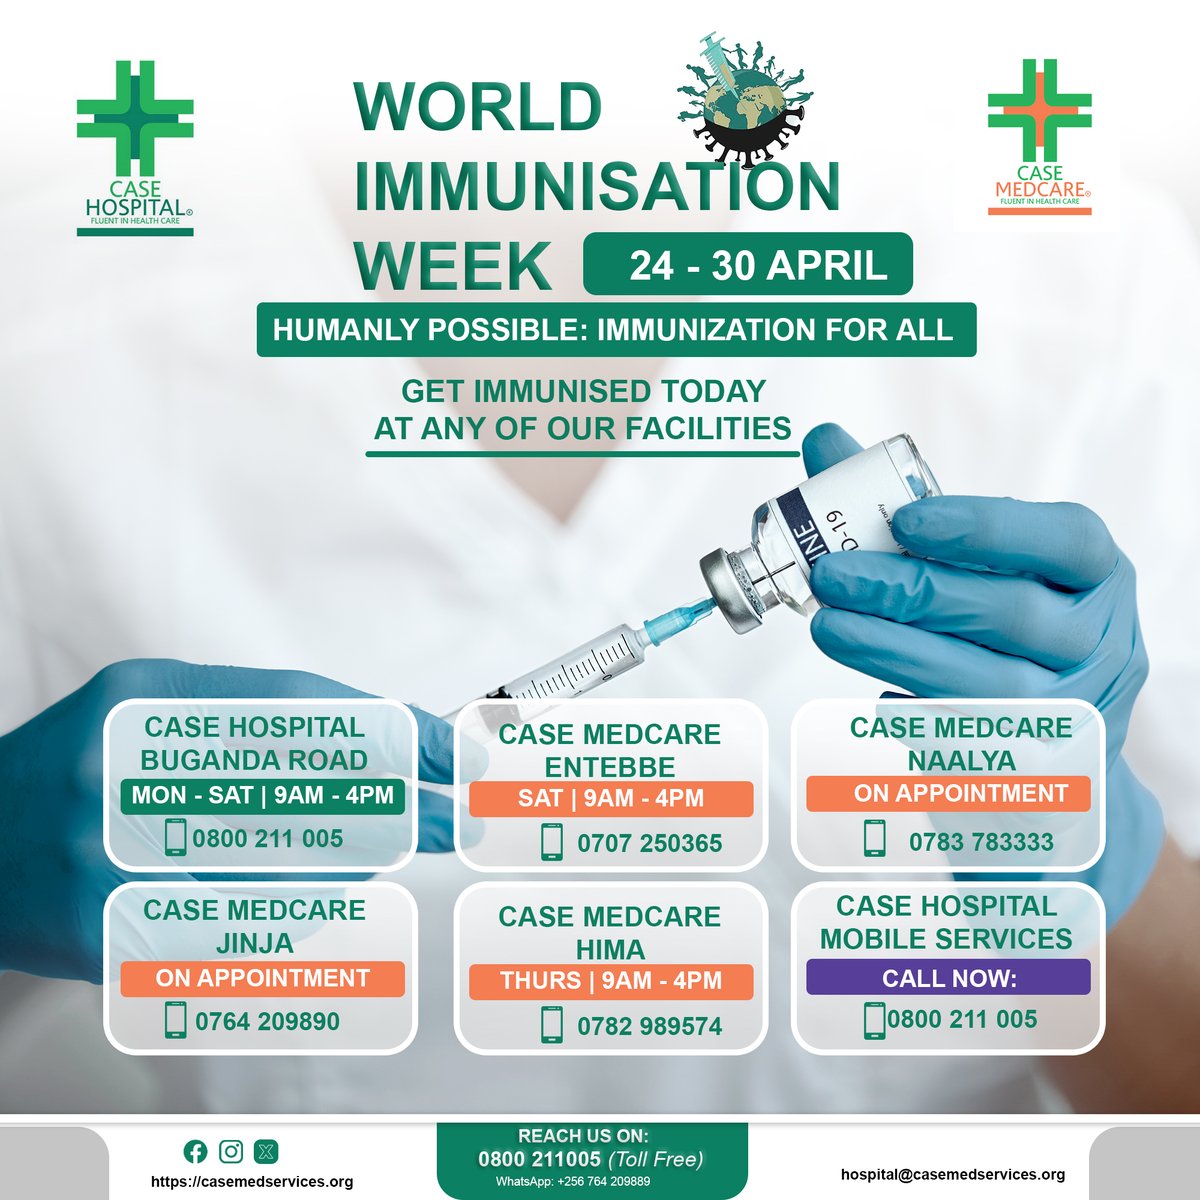 Are you aware that vaccines prevent 4 million childhood deaths annually? Immunization unquestionably saves lives. Don't hesitate; visit or call any of our facilities today to get vaccinated.

#WorldImmunisationWeek